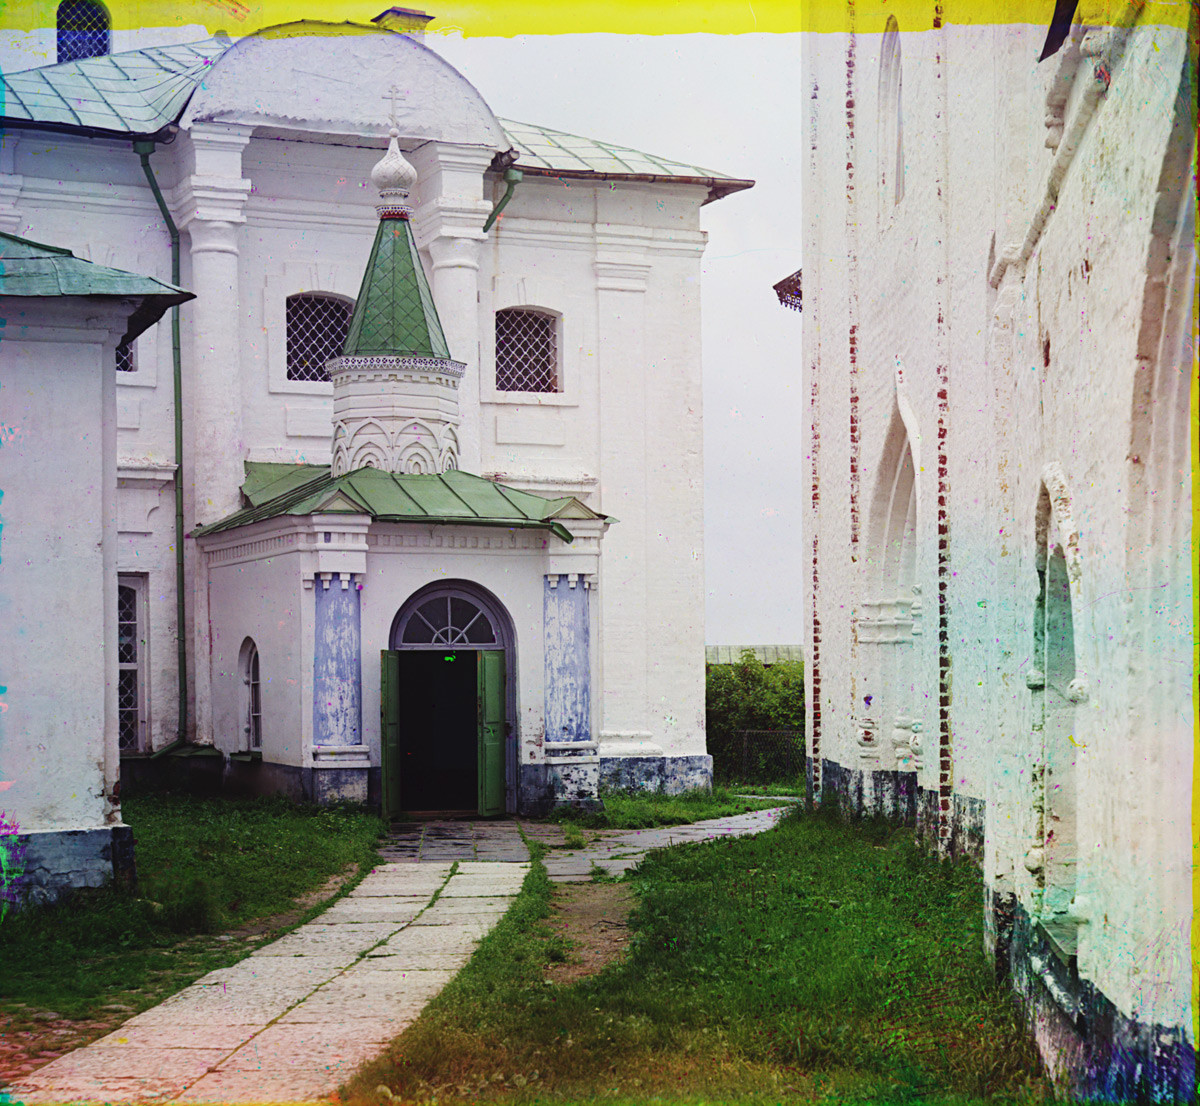 St. Kirill Belozersk Monastery. Church of St. Kirill Belozersk, west facade with main entrance. On right: north wall of Church of Archangel Gabriel. Summer 1909.